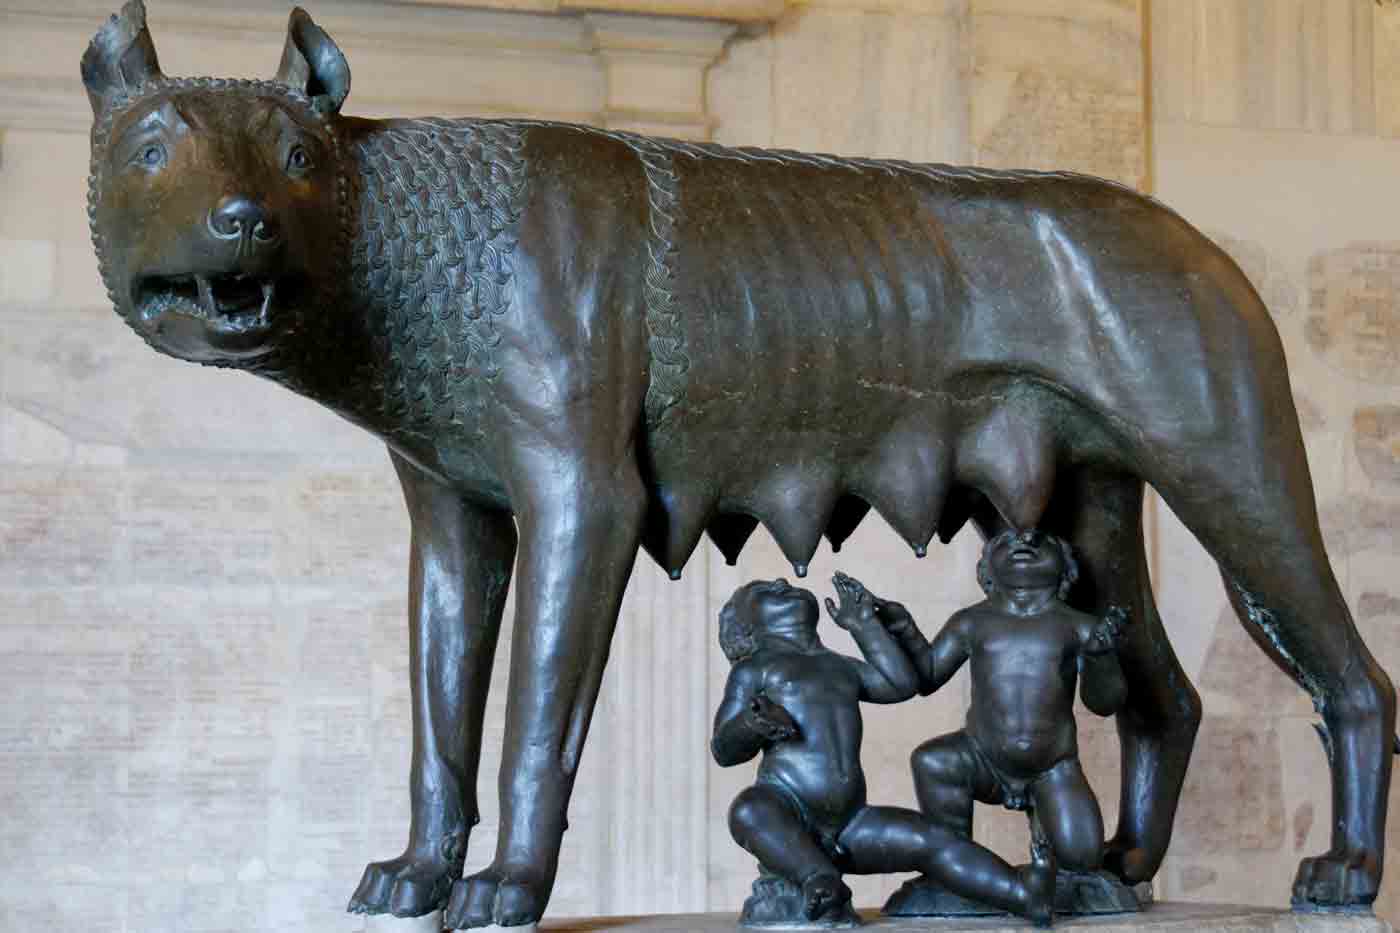 She-wolf - Capitoline Museums